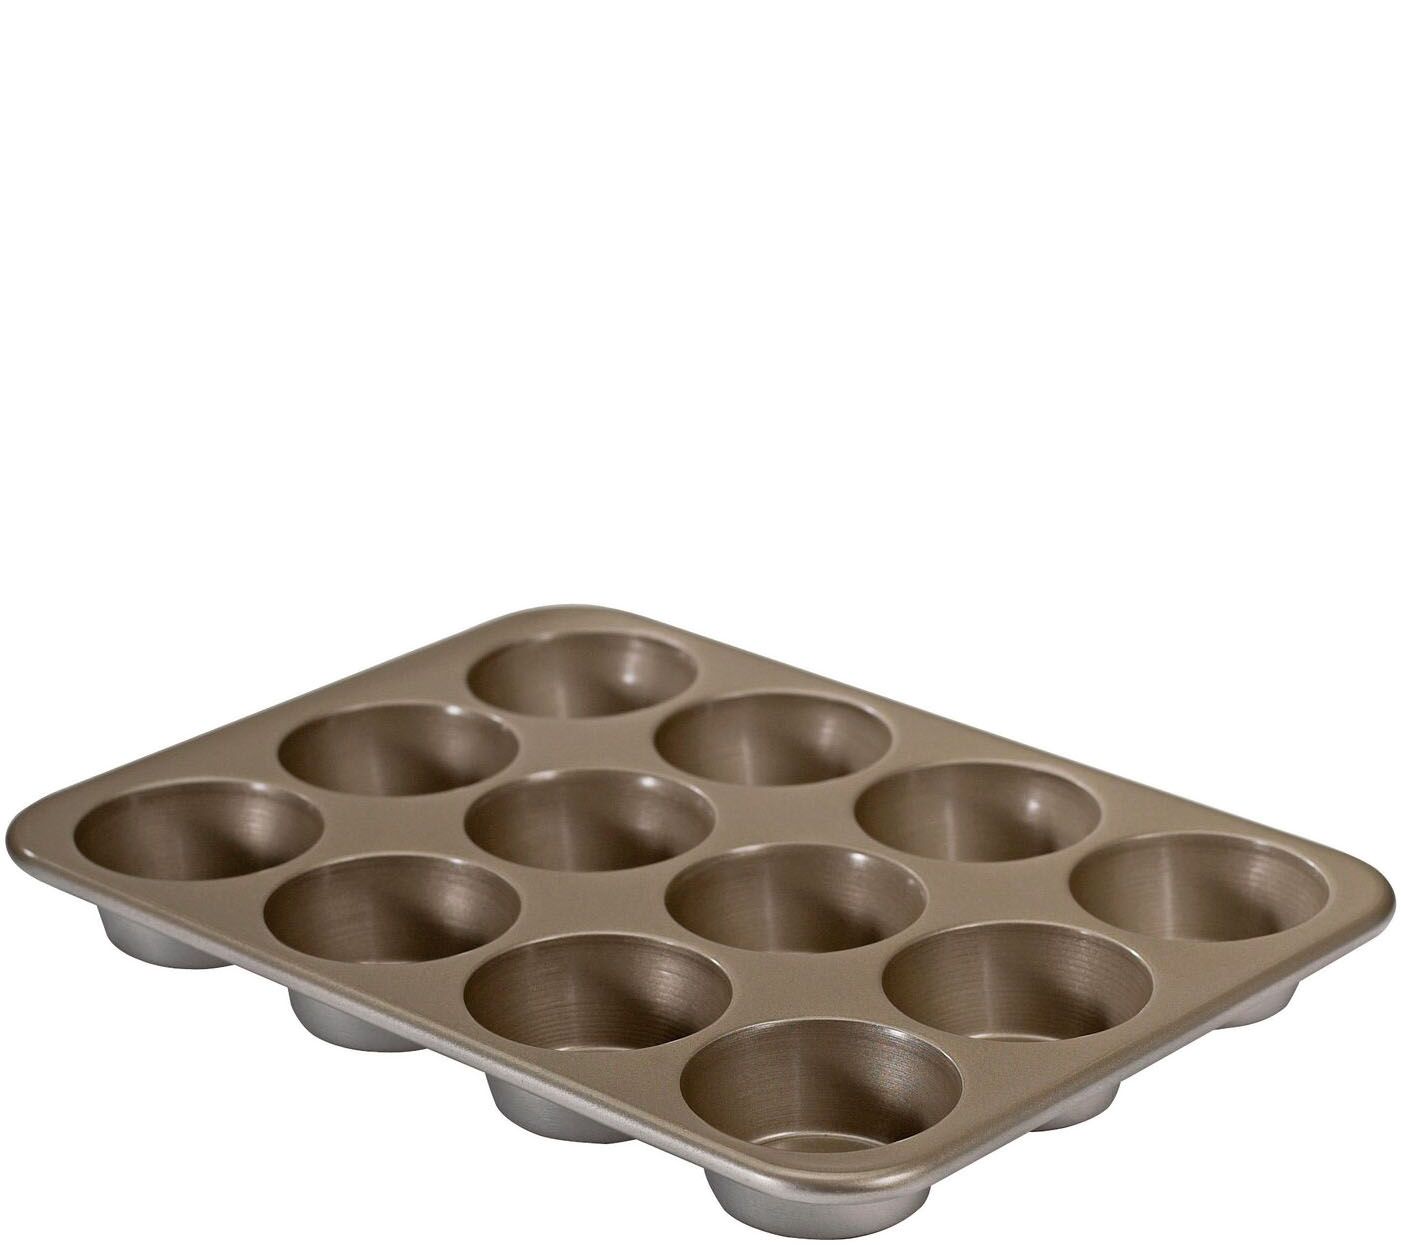 Nordic Ware Natural Aluminum Commercial Muffin Pan, 12 Cup